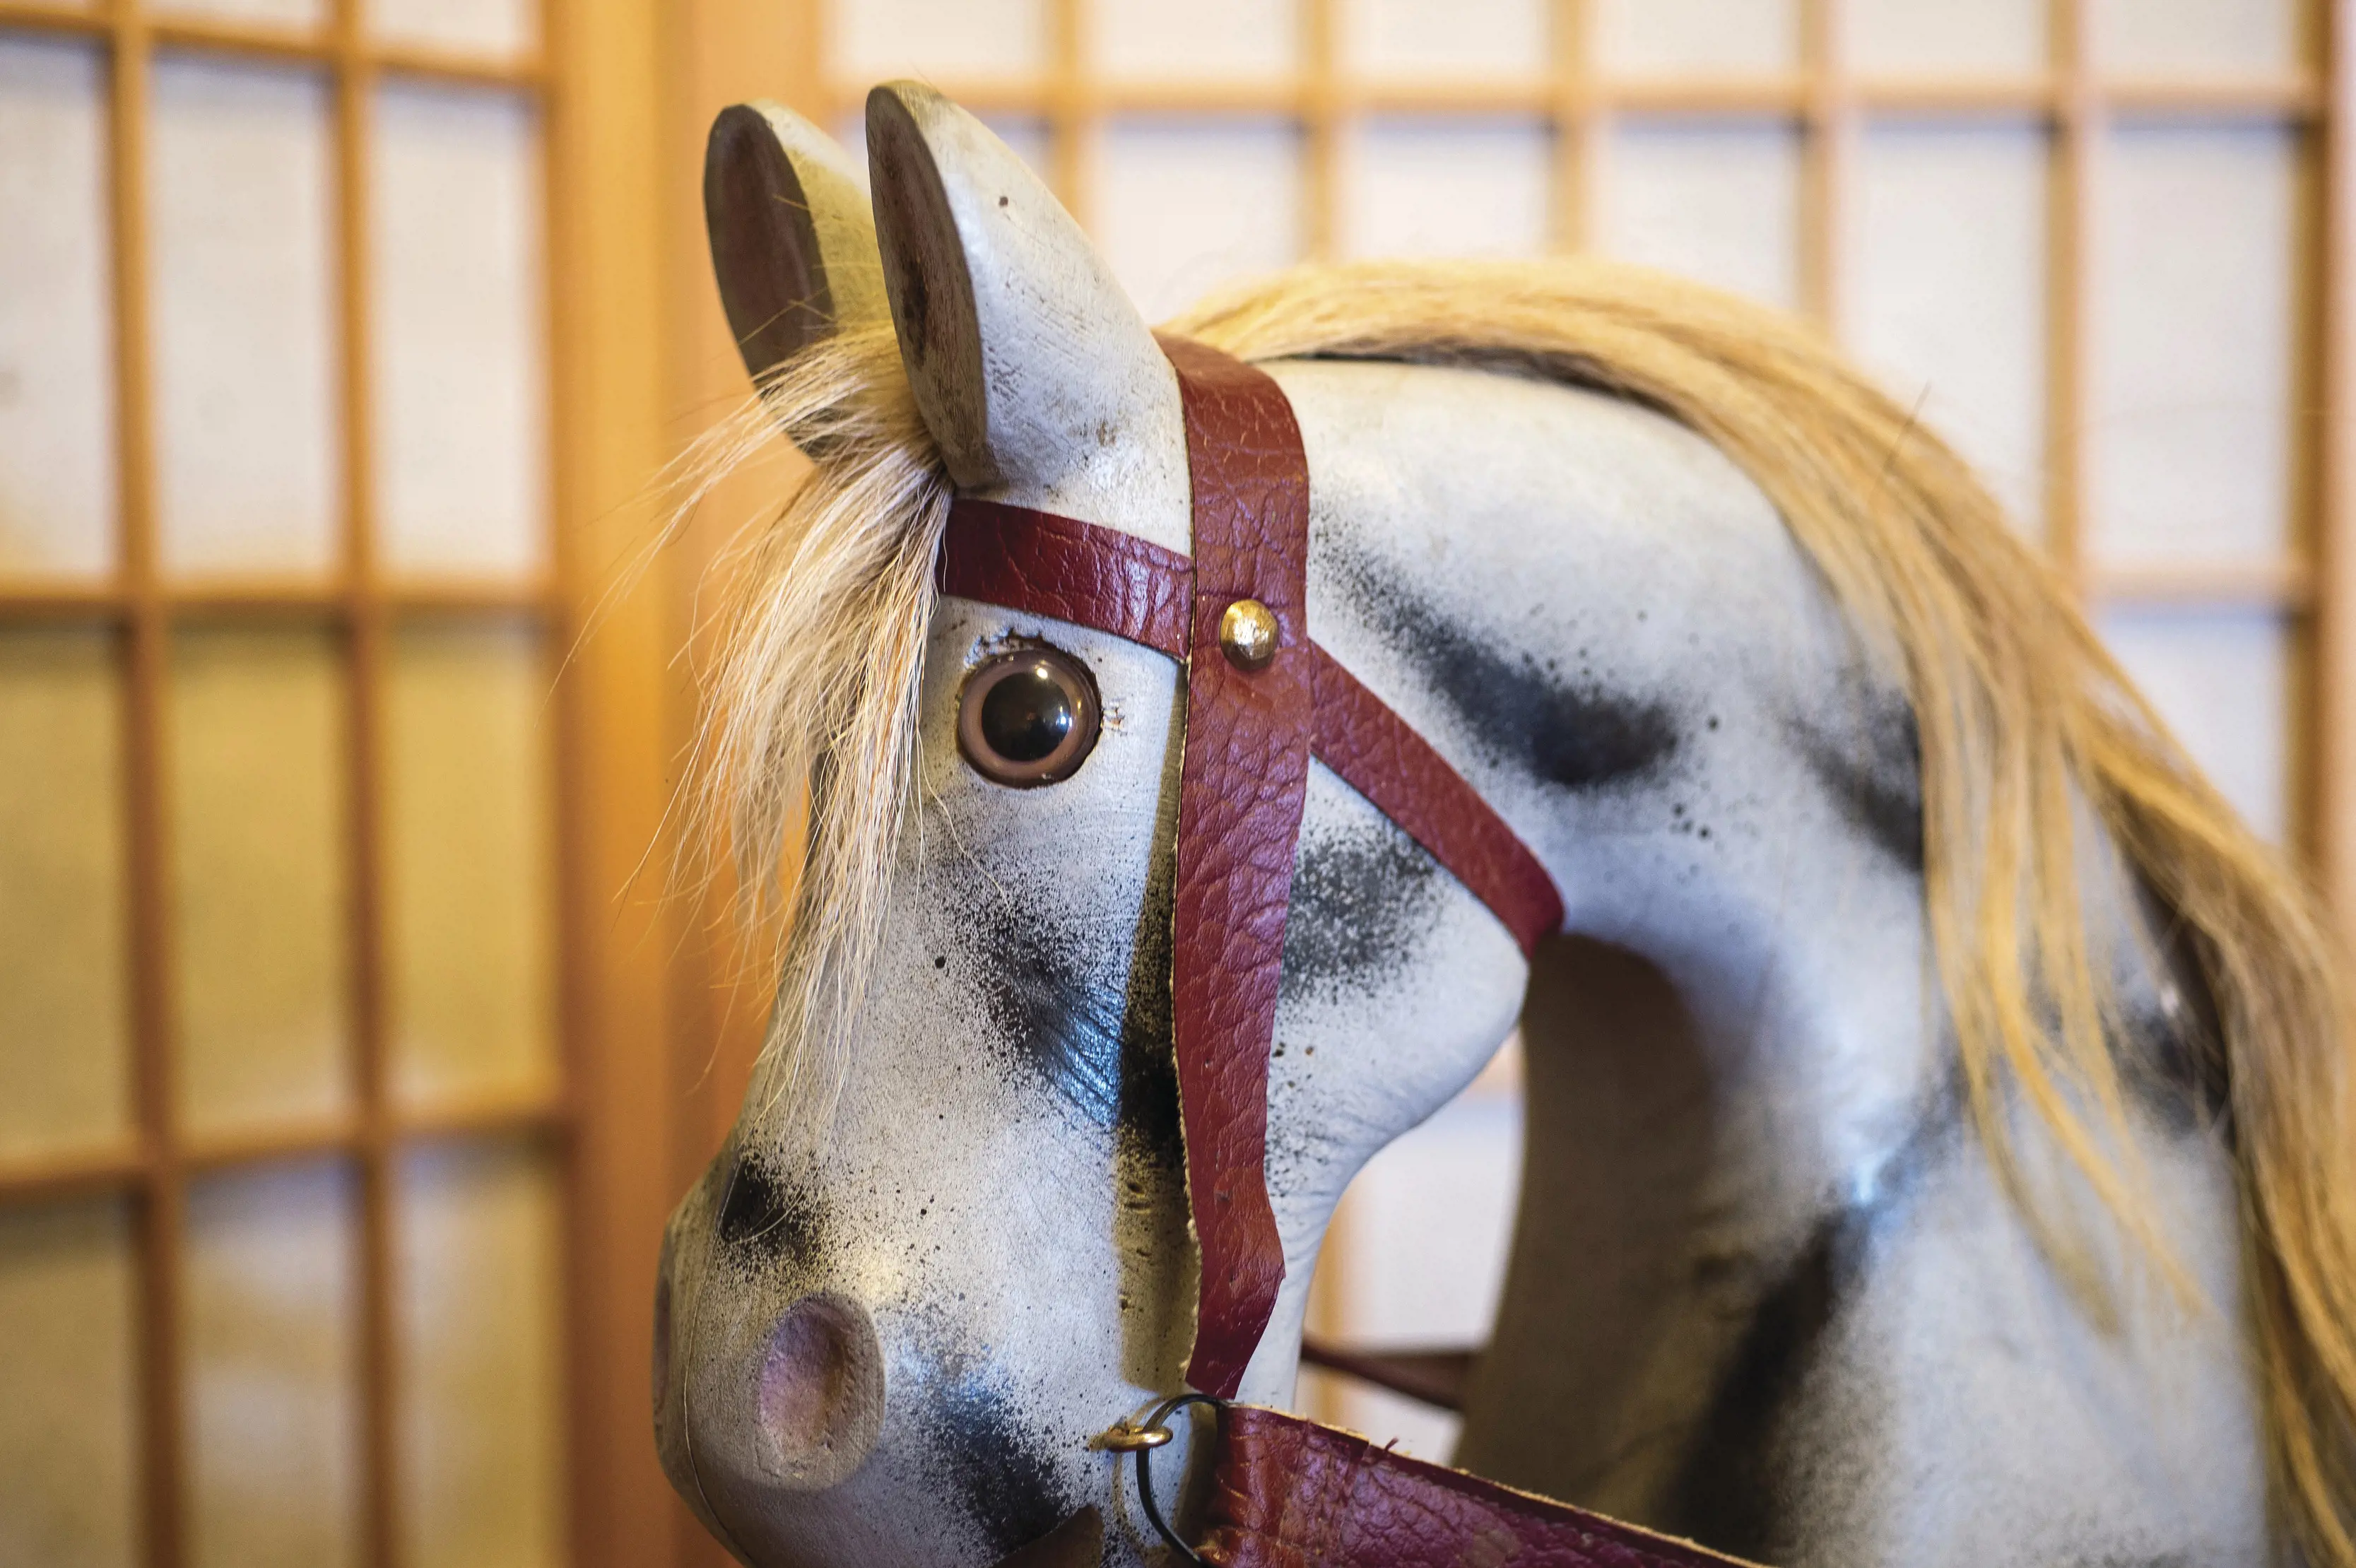 Close up image of a manmade horse within the Purple Possum Cafe.